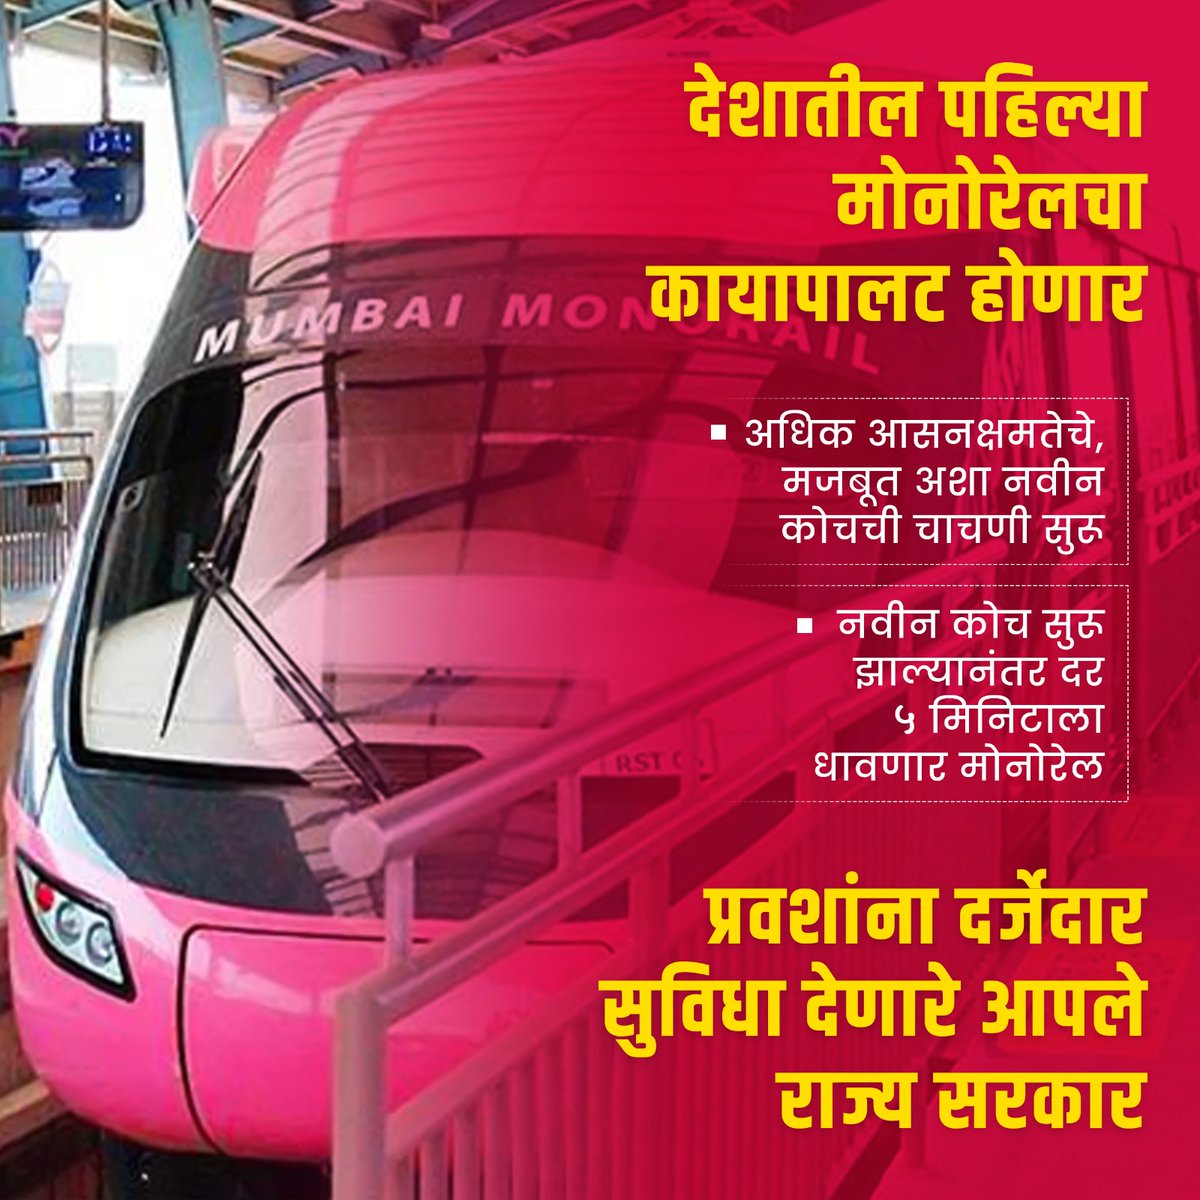 Kudos to CM Eknath Shinde and the Maharashtra government for modernizing the country's first monorail! New coaches with increased seating capacity are being trialed, ensuring more frequent services every 5 minutes.